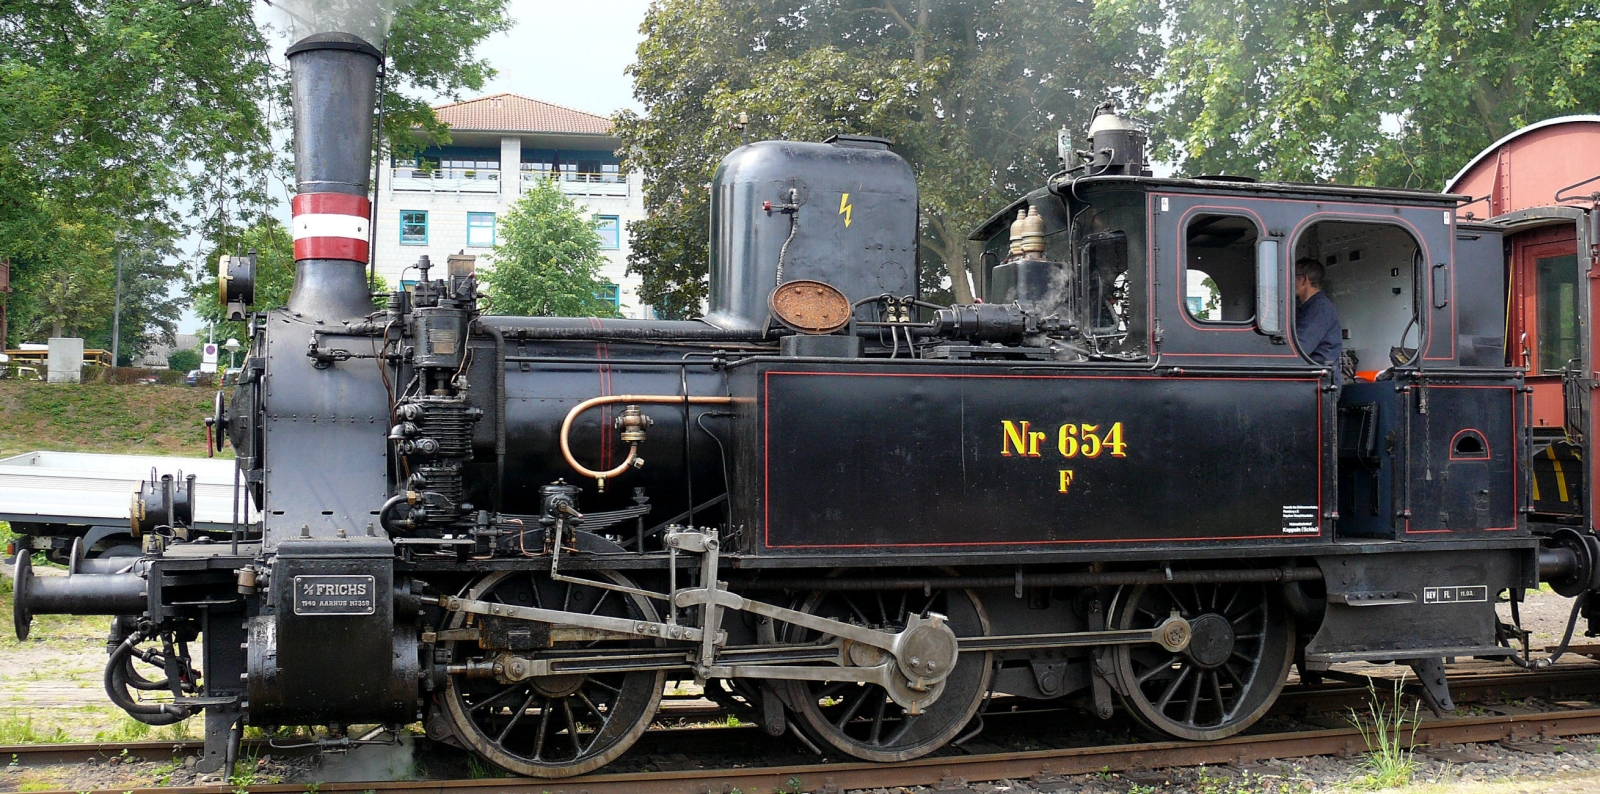 Number 654 from the last batch in 2008 in Kappeln